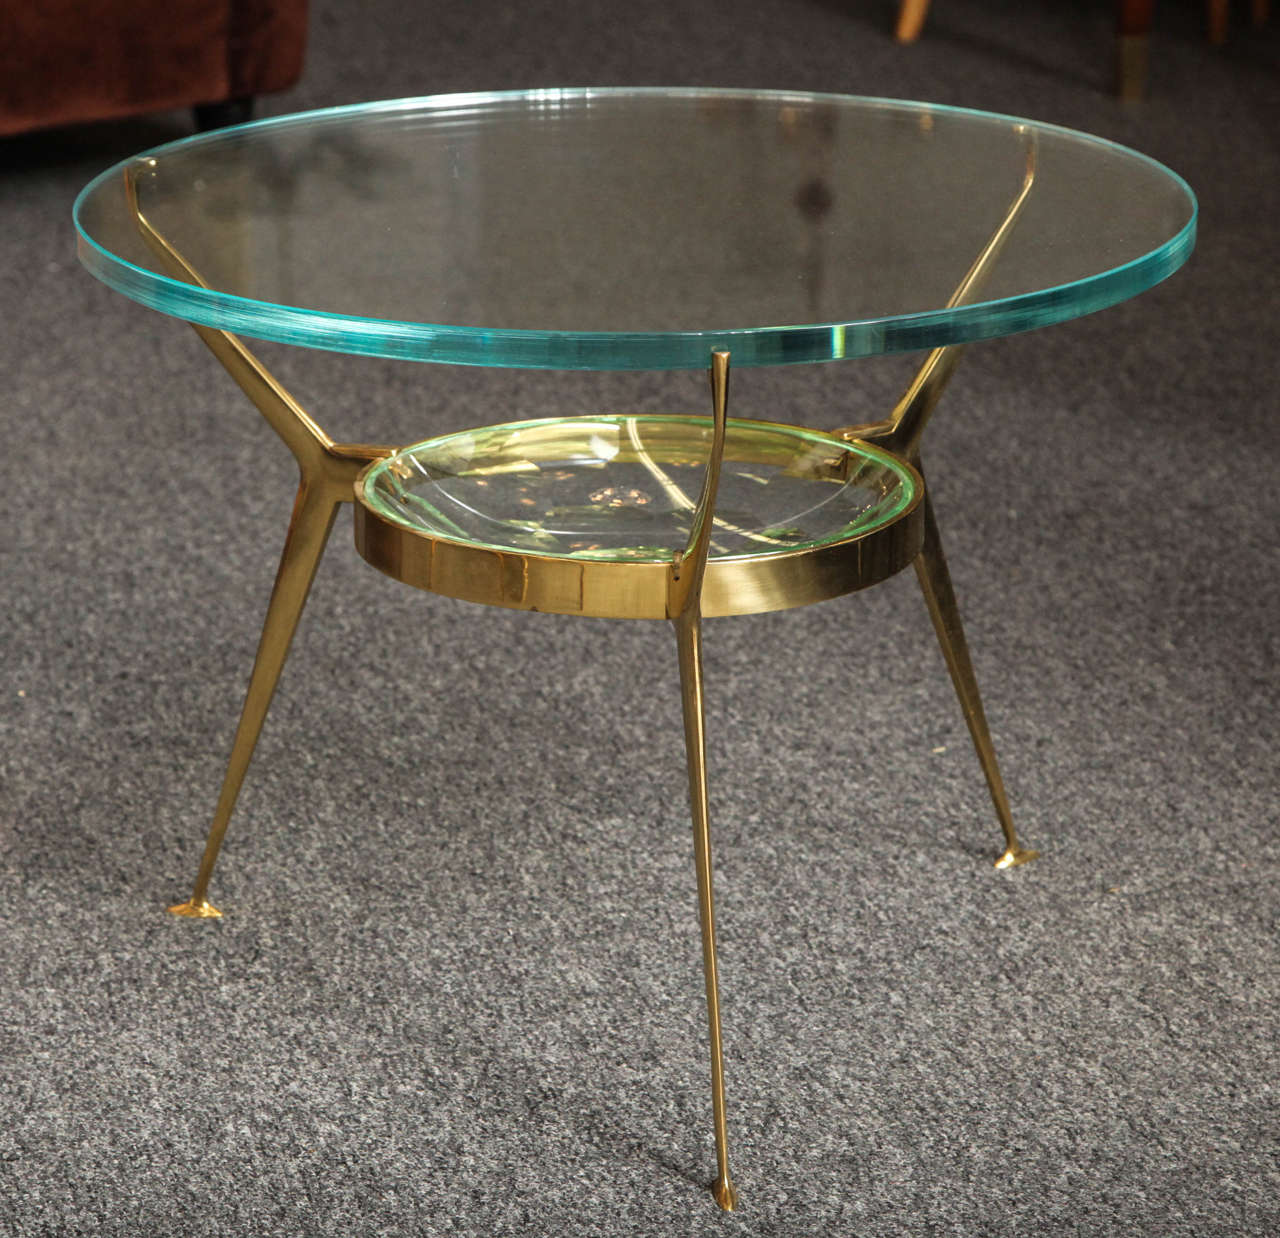 Stunning cocktail table made in Milan 1955 by Fontana Arte, brass base with a large cut-glass lens fixed into the frame, unusual to see with the cut glass in this large size, most likely a commission real beauty, great quality.